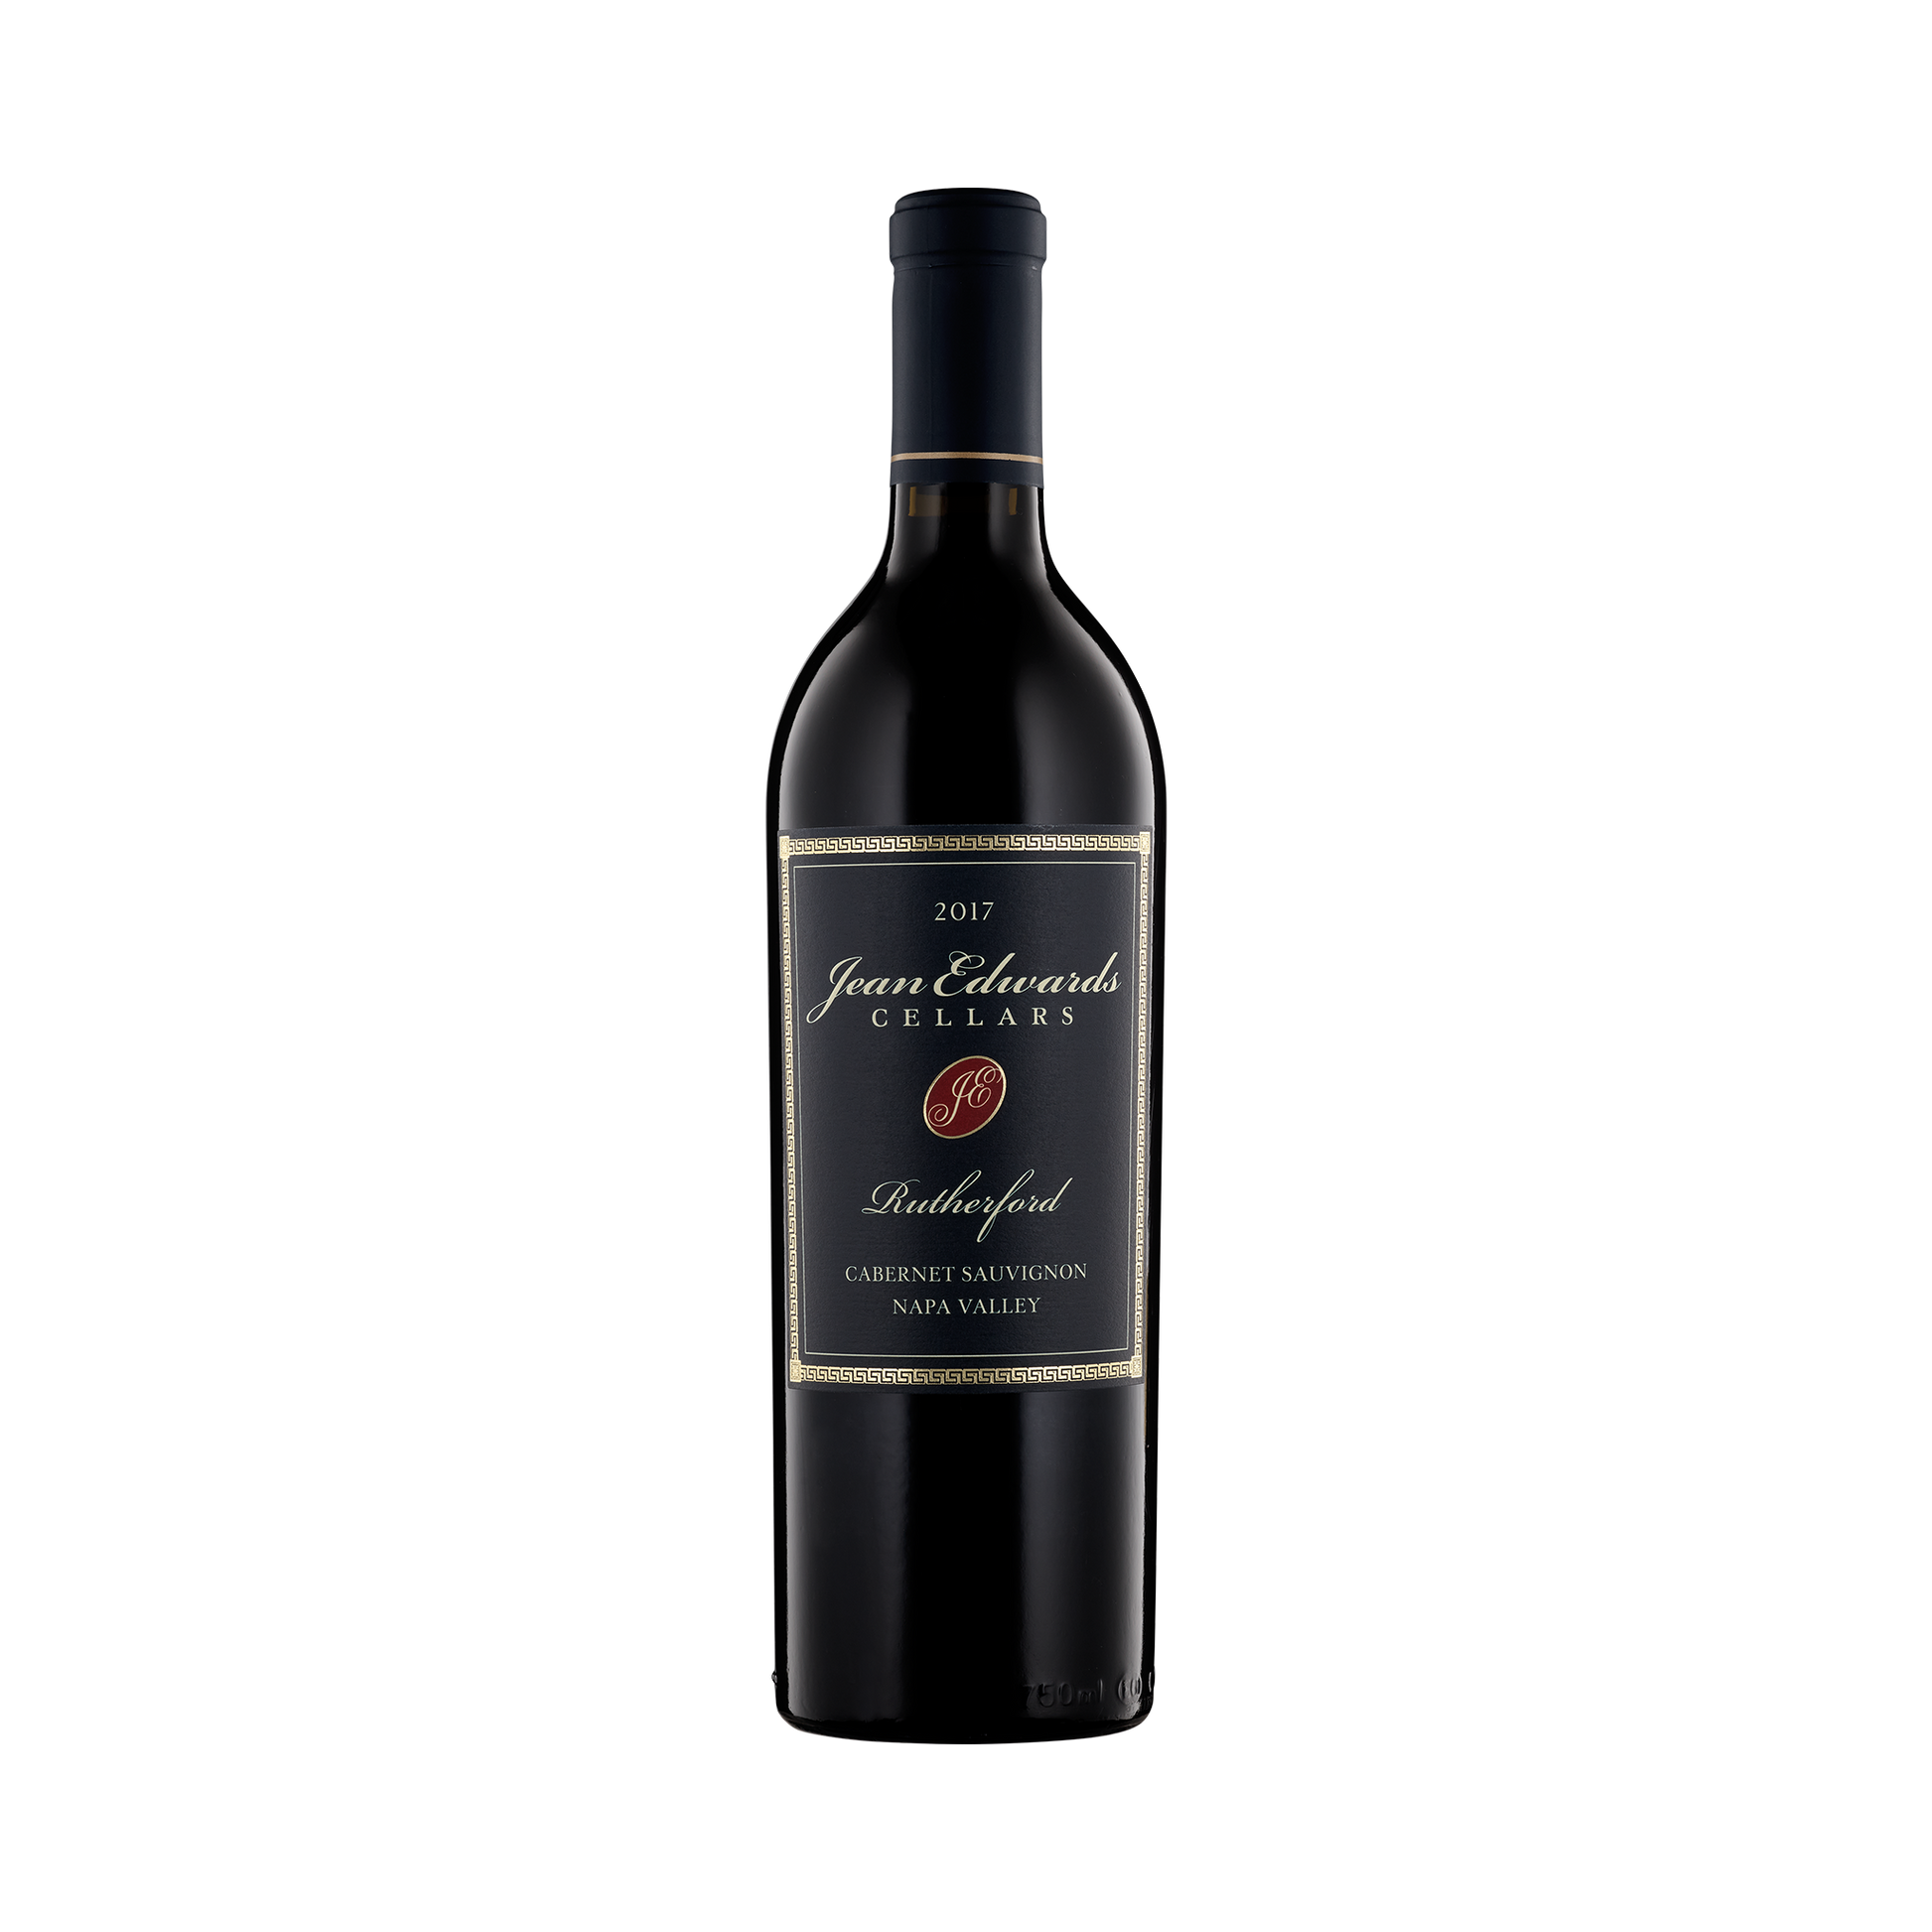 A bottle of Jean Edwards Cellars 2017 Cabernet Sauvignon Rutherford